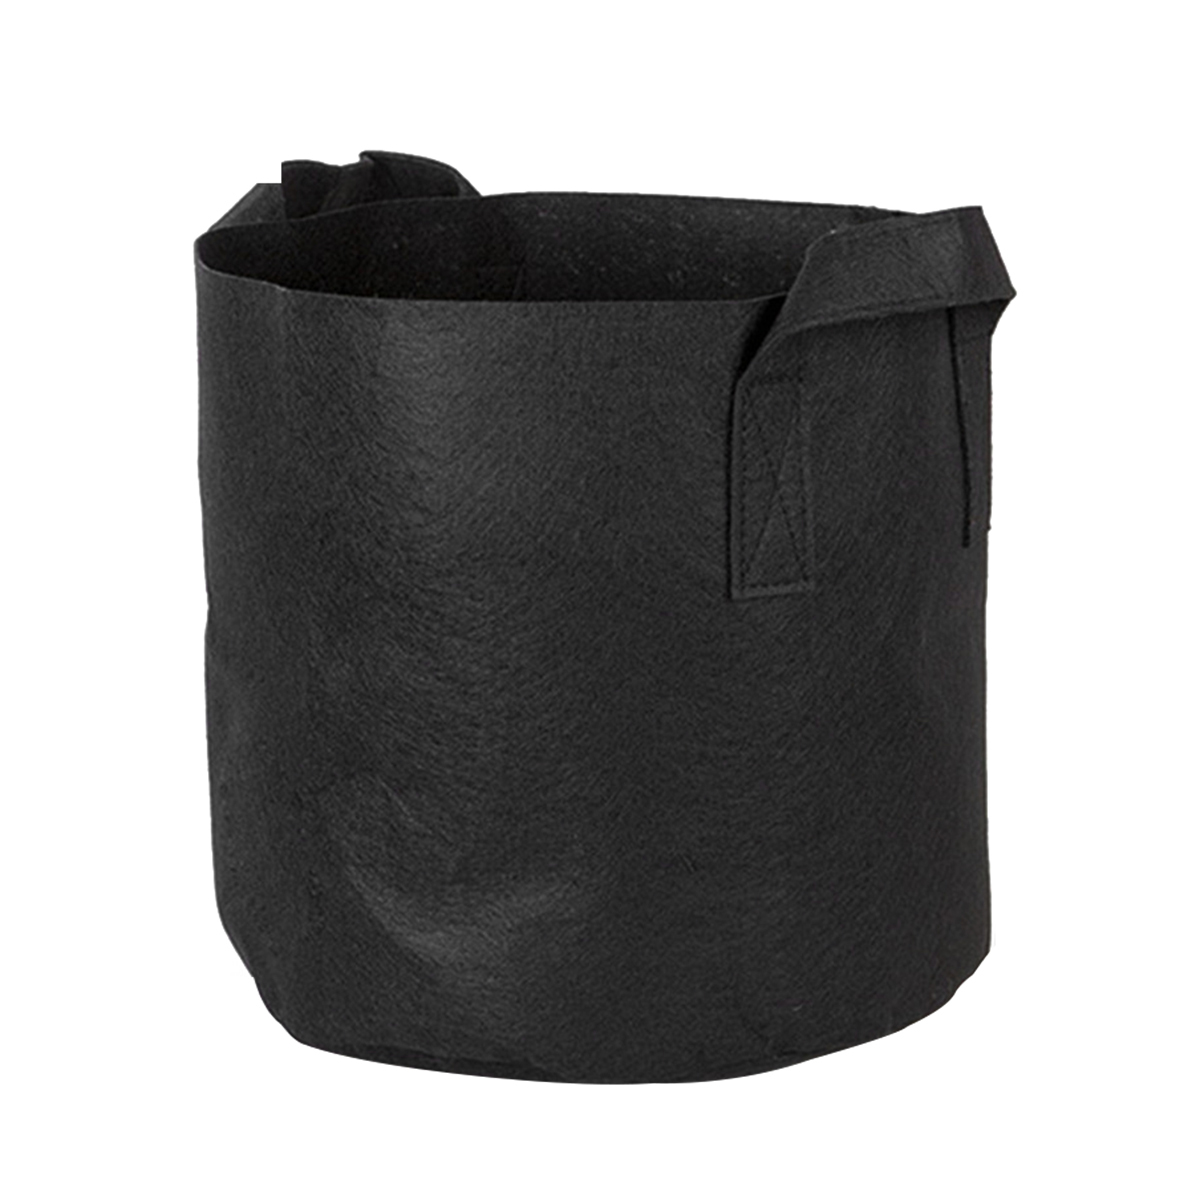 Non-woven-Fabric-Planting-Grow-Box-Vegetable-Flower-Pots-Bag-Planter-Black-with-Handles-1678096-9